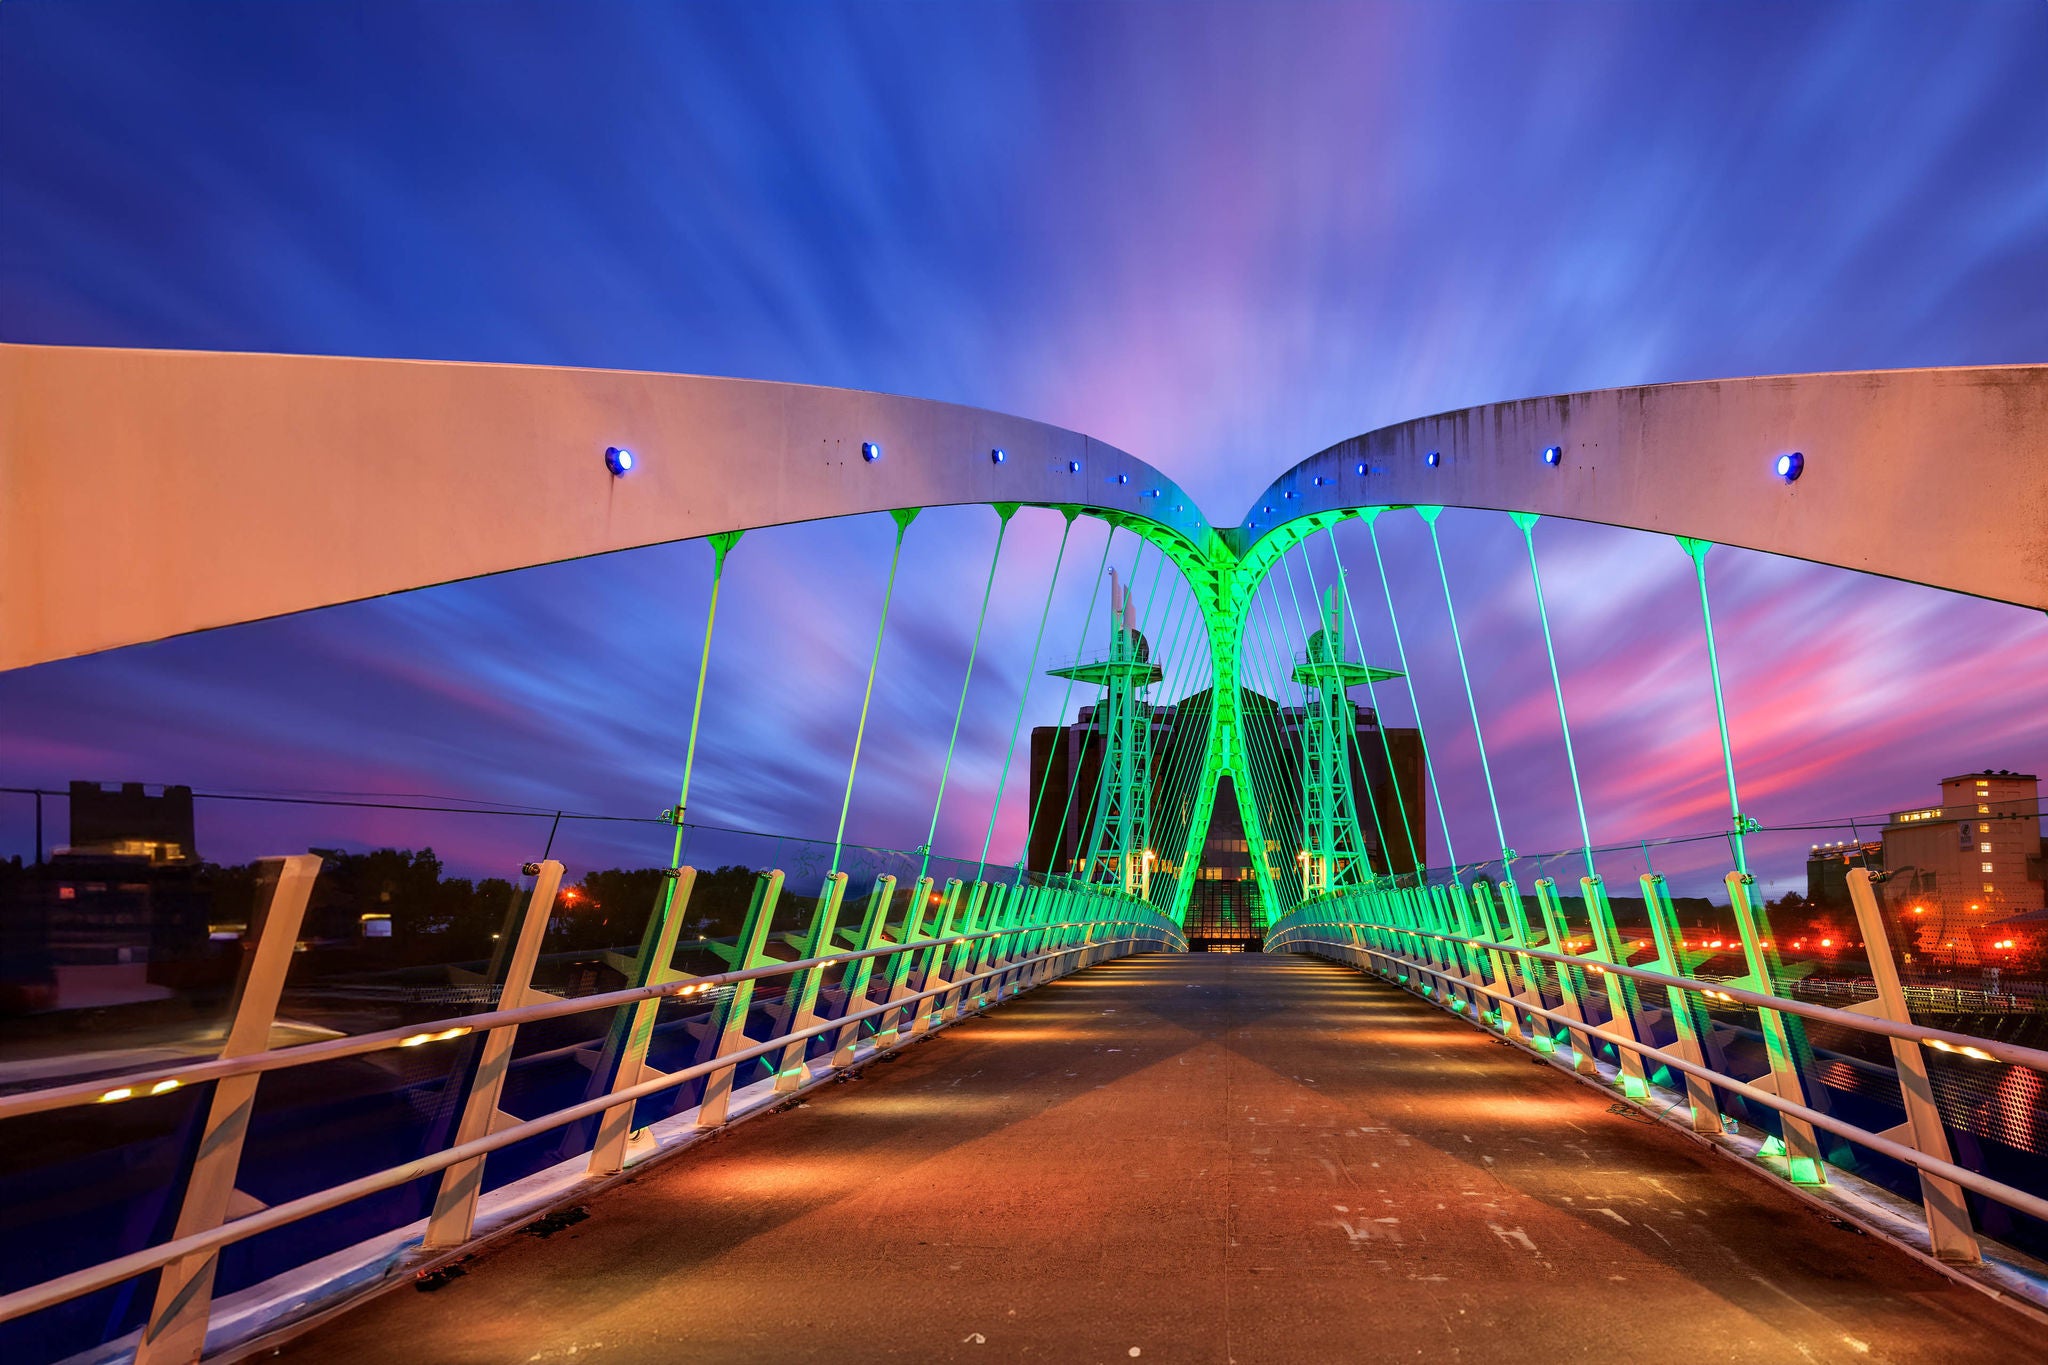 Photo of the Millenium Bridge at Salford Quays in Manchester, England at twilight blue hour.